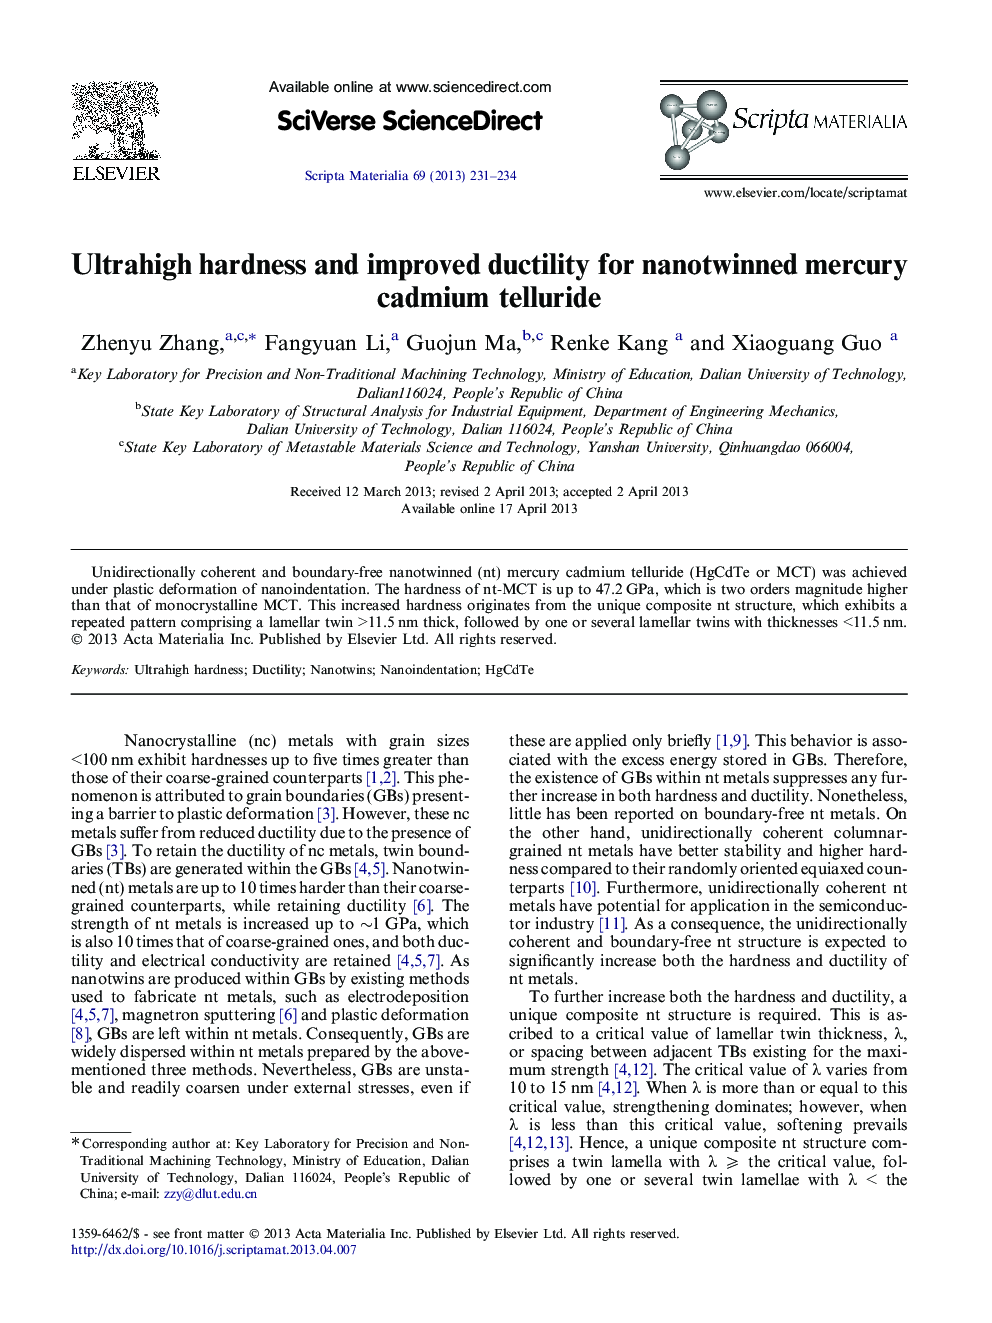 Ultrahigh hardness and improved ductility for nanotwinned mercury cadmium telluride